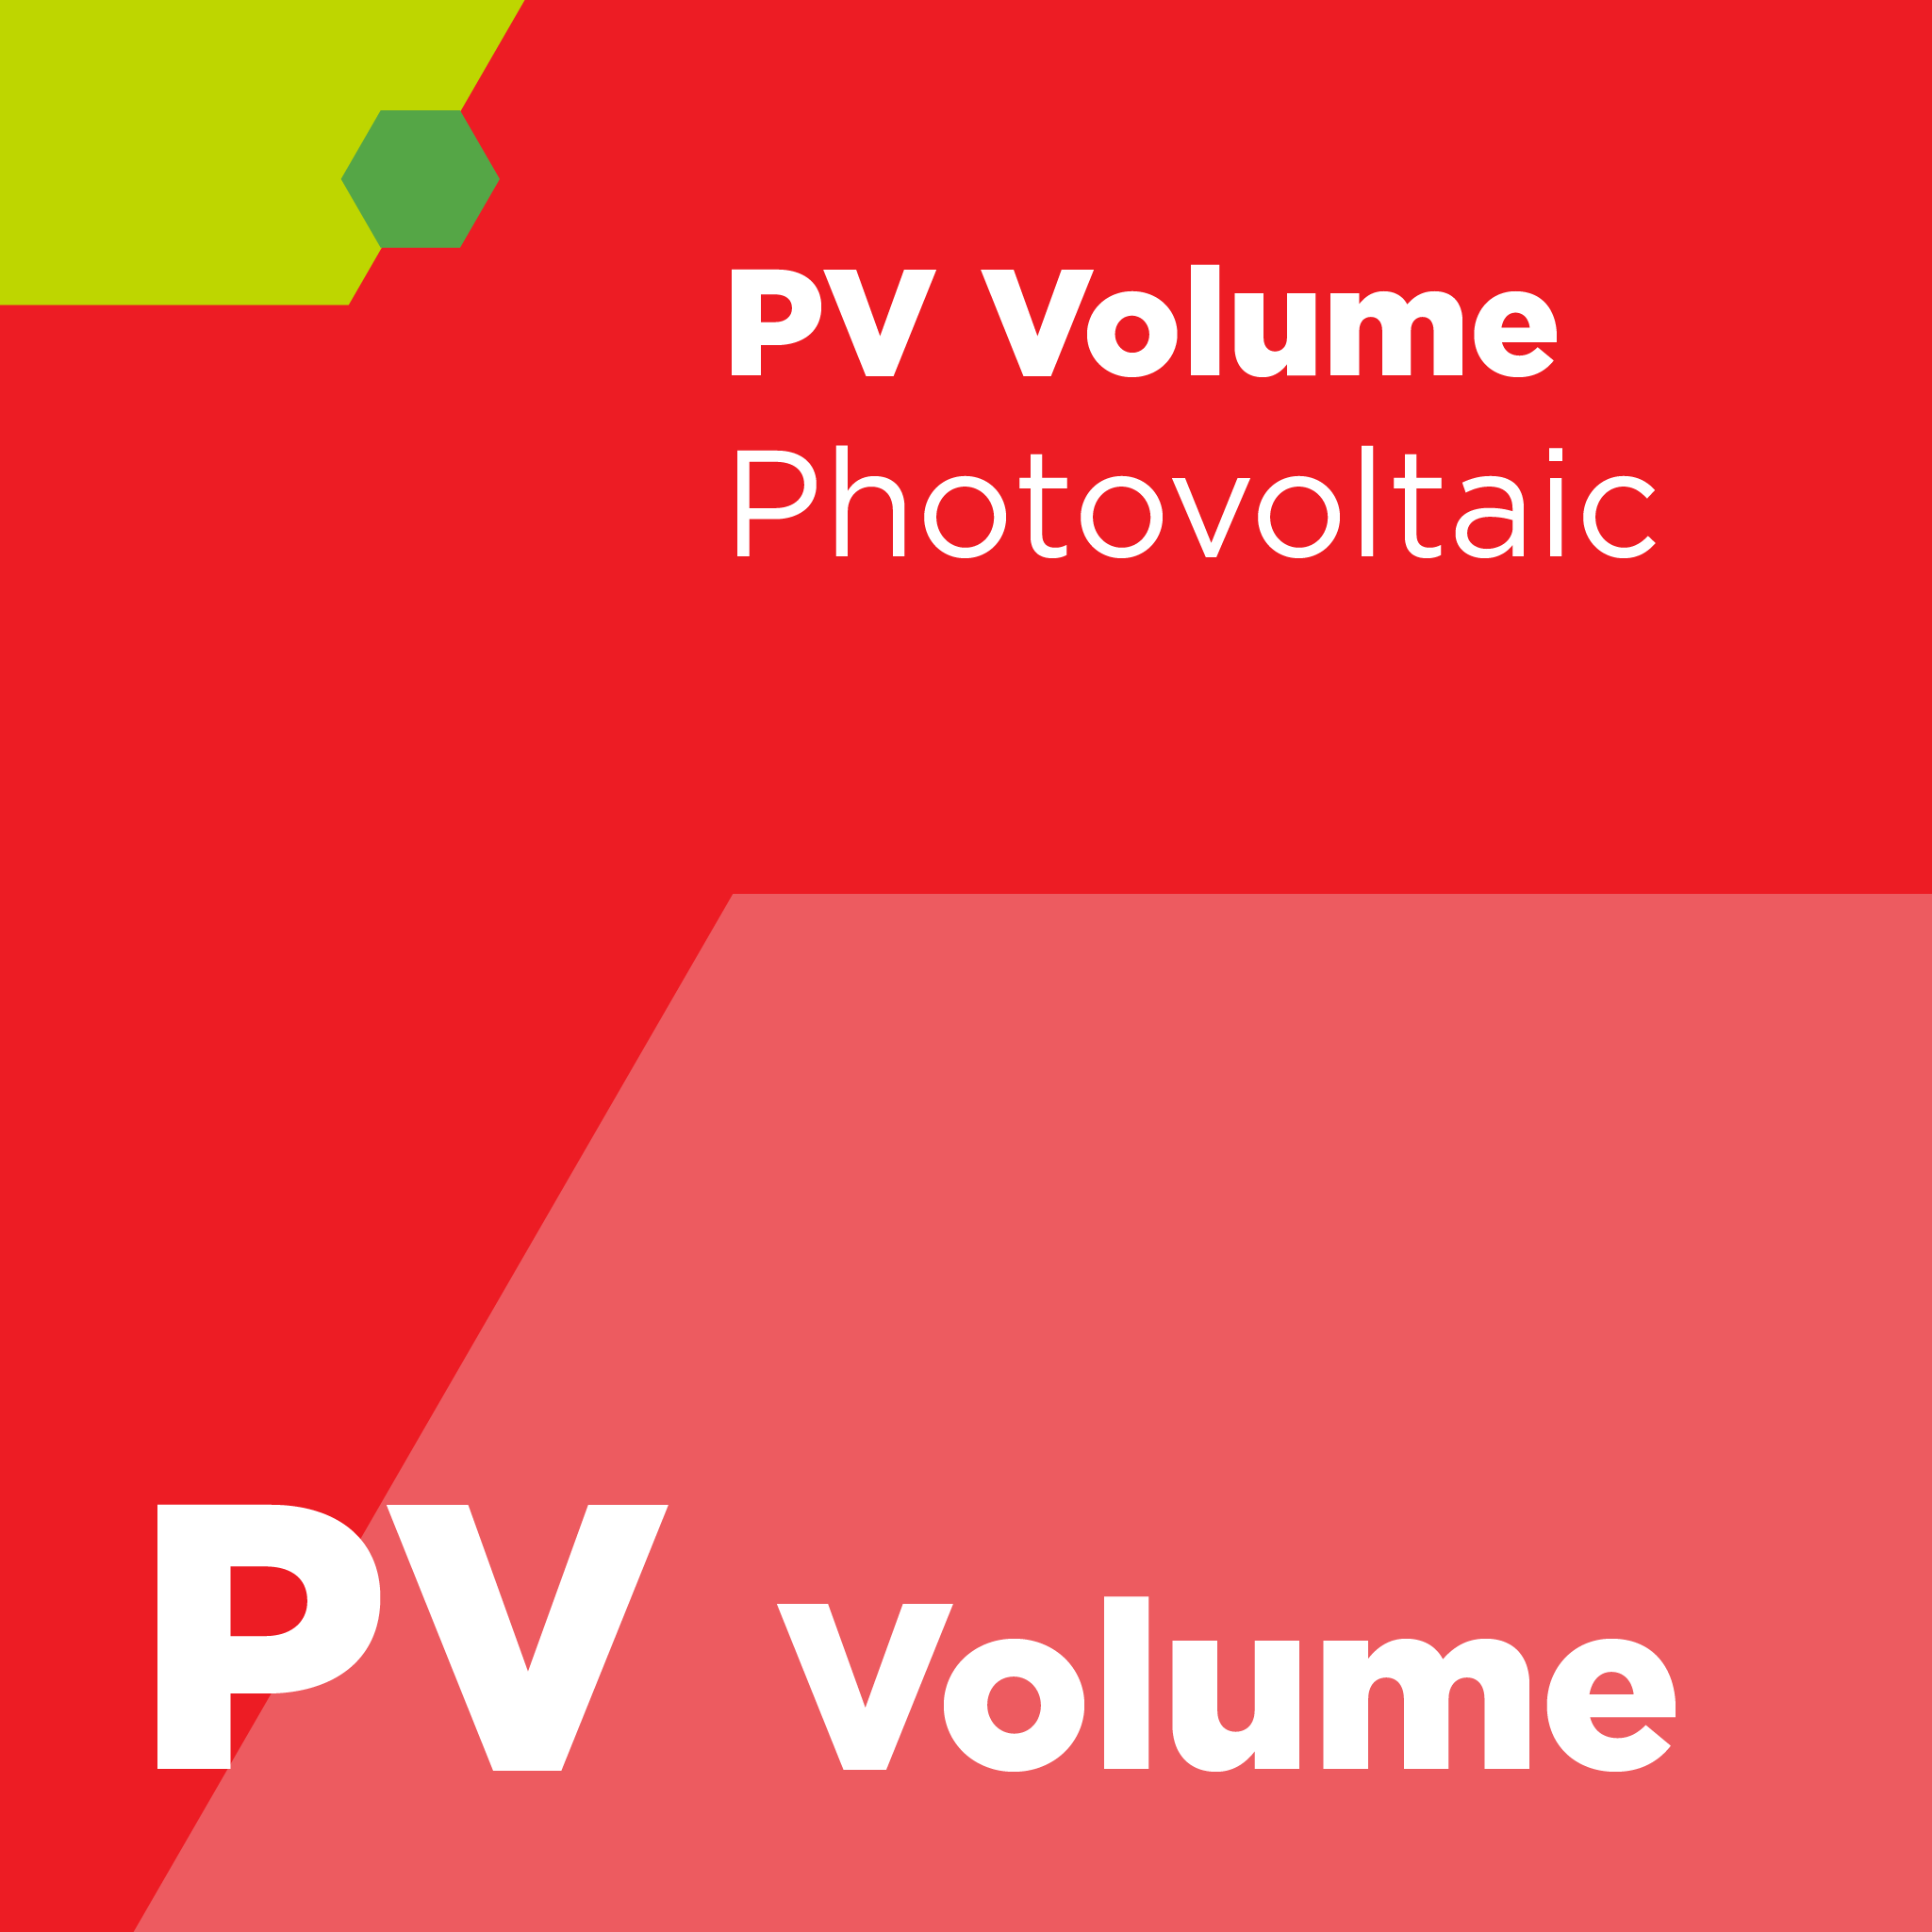 PV00400 - SEMI PV4 - Specification for Range of 5th Generation Substrate Sizes for Thin Film Photovoltaic Applications